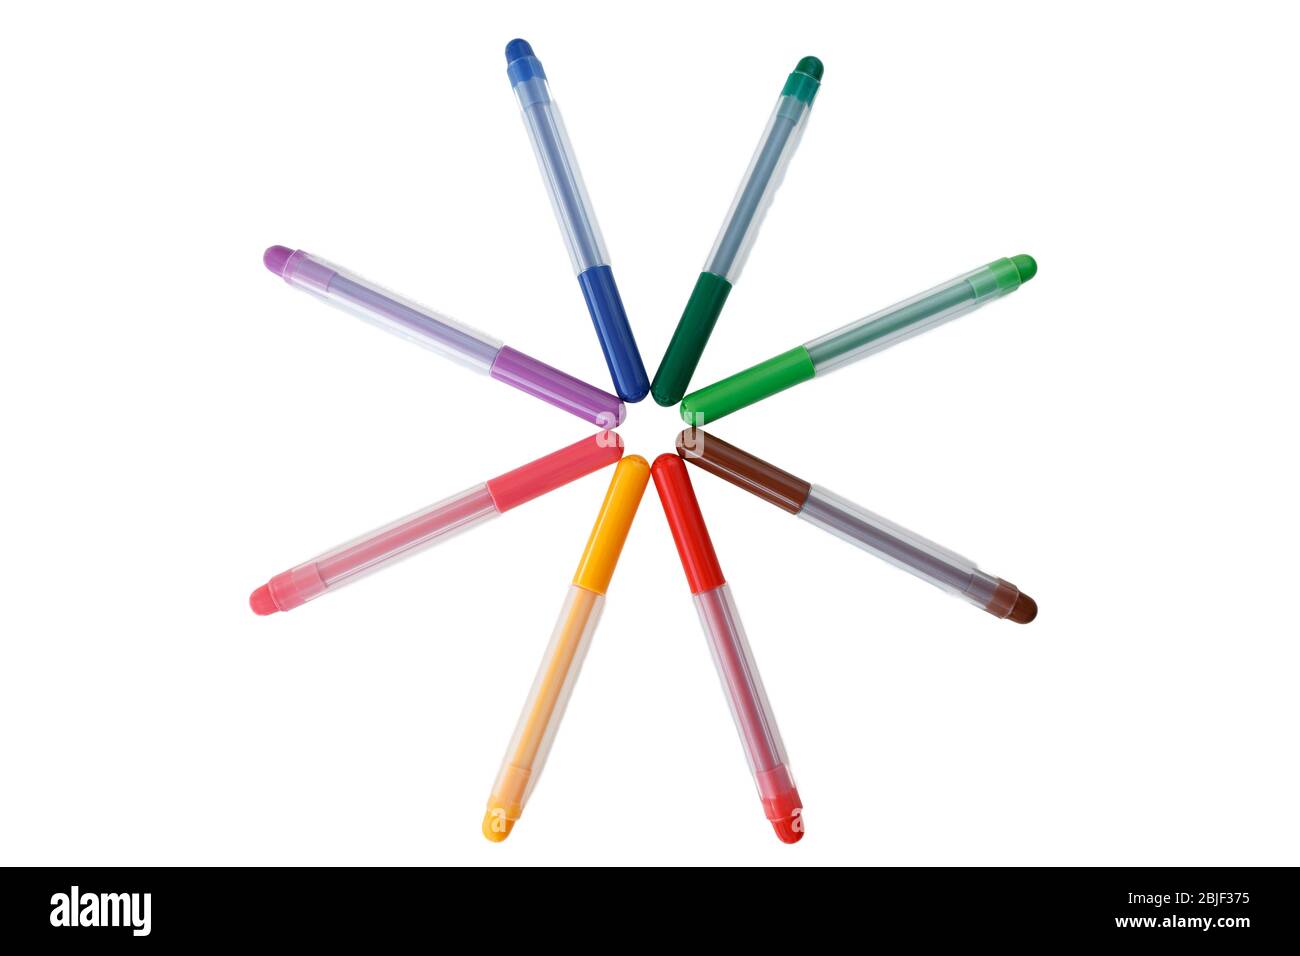 https://c8.alamy.com/comp/2BJF375/close-up-of-set-of-colorful-rainbow-colored-marker-pens-viewed-from-above-isolated-on-white-background-with-clipping-path-top-view-2BJF375.jpg